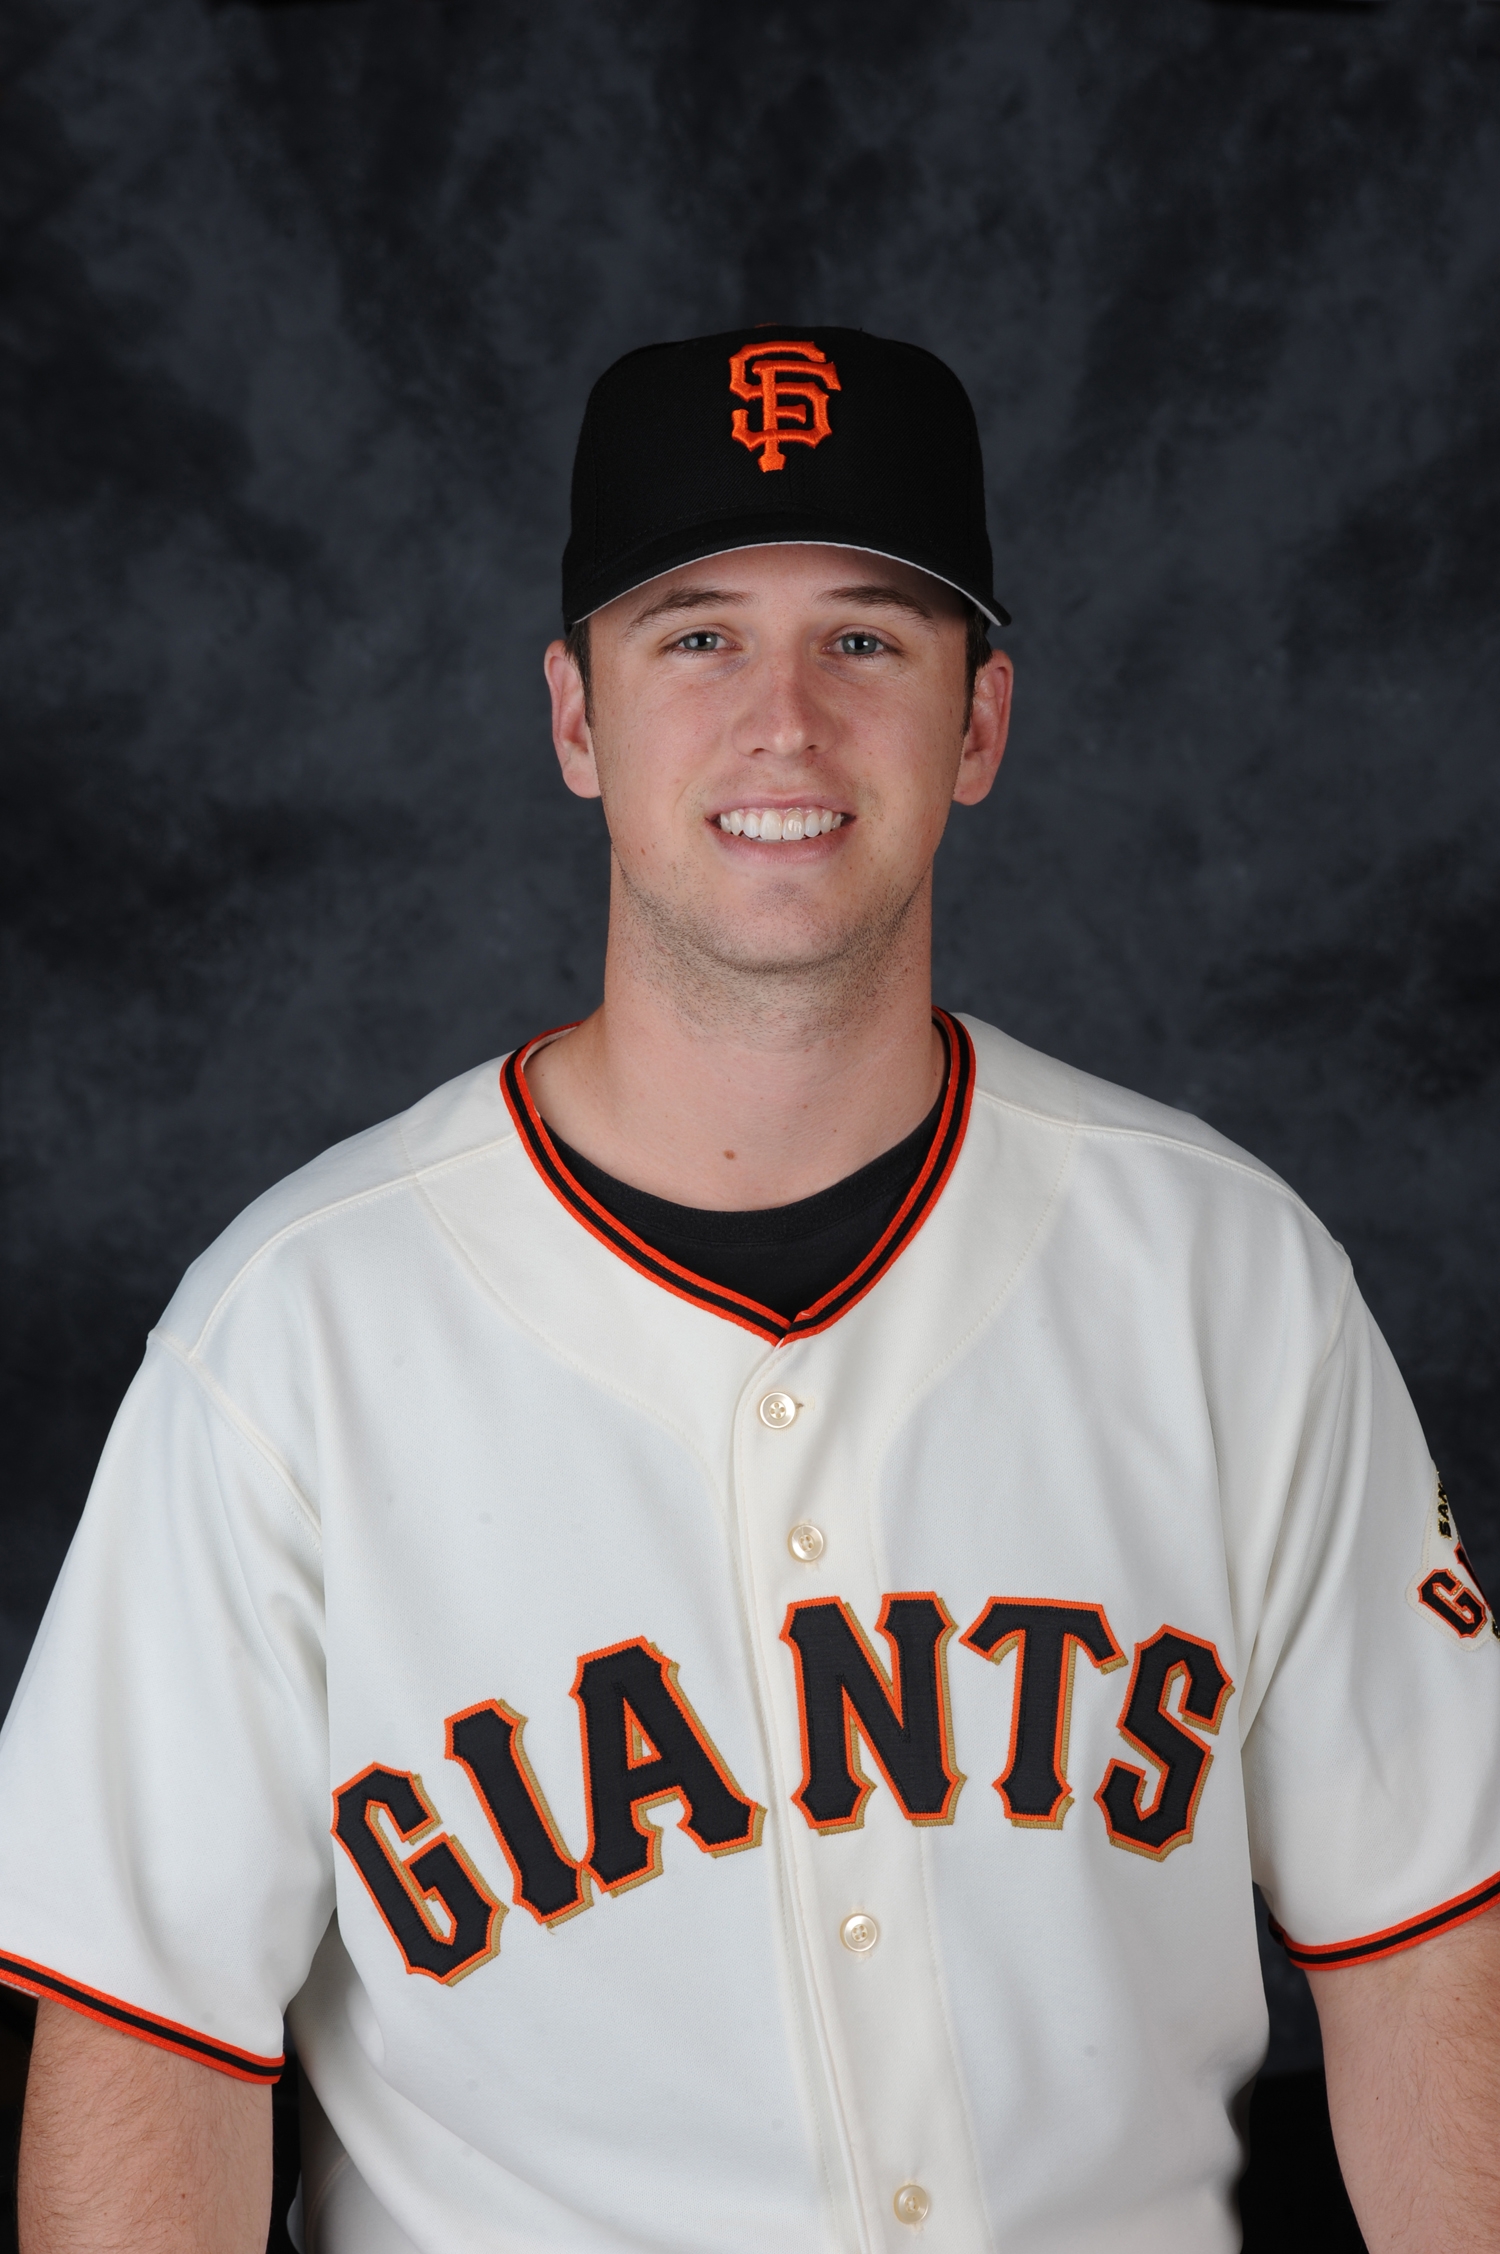 Find more Buster Posey Wallpaper Buster posey wallpaper. 